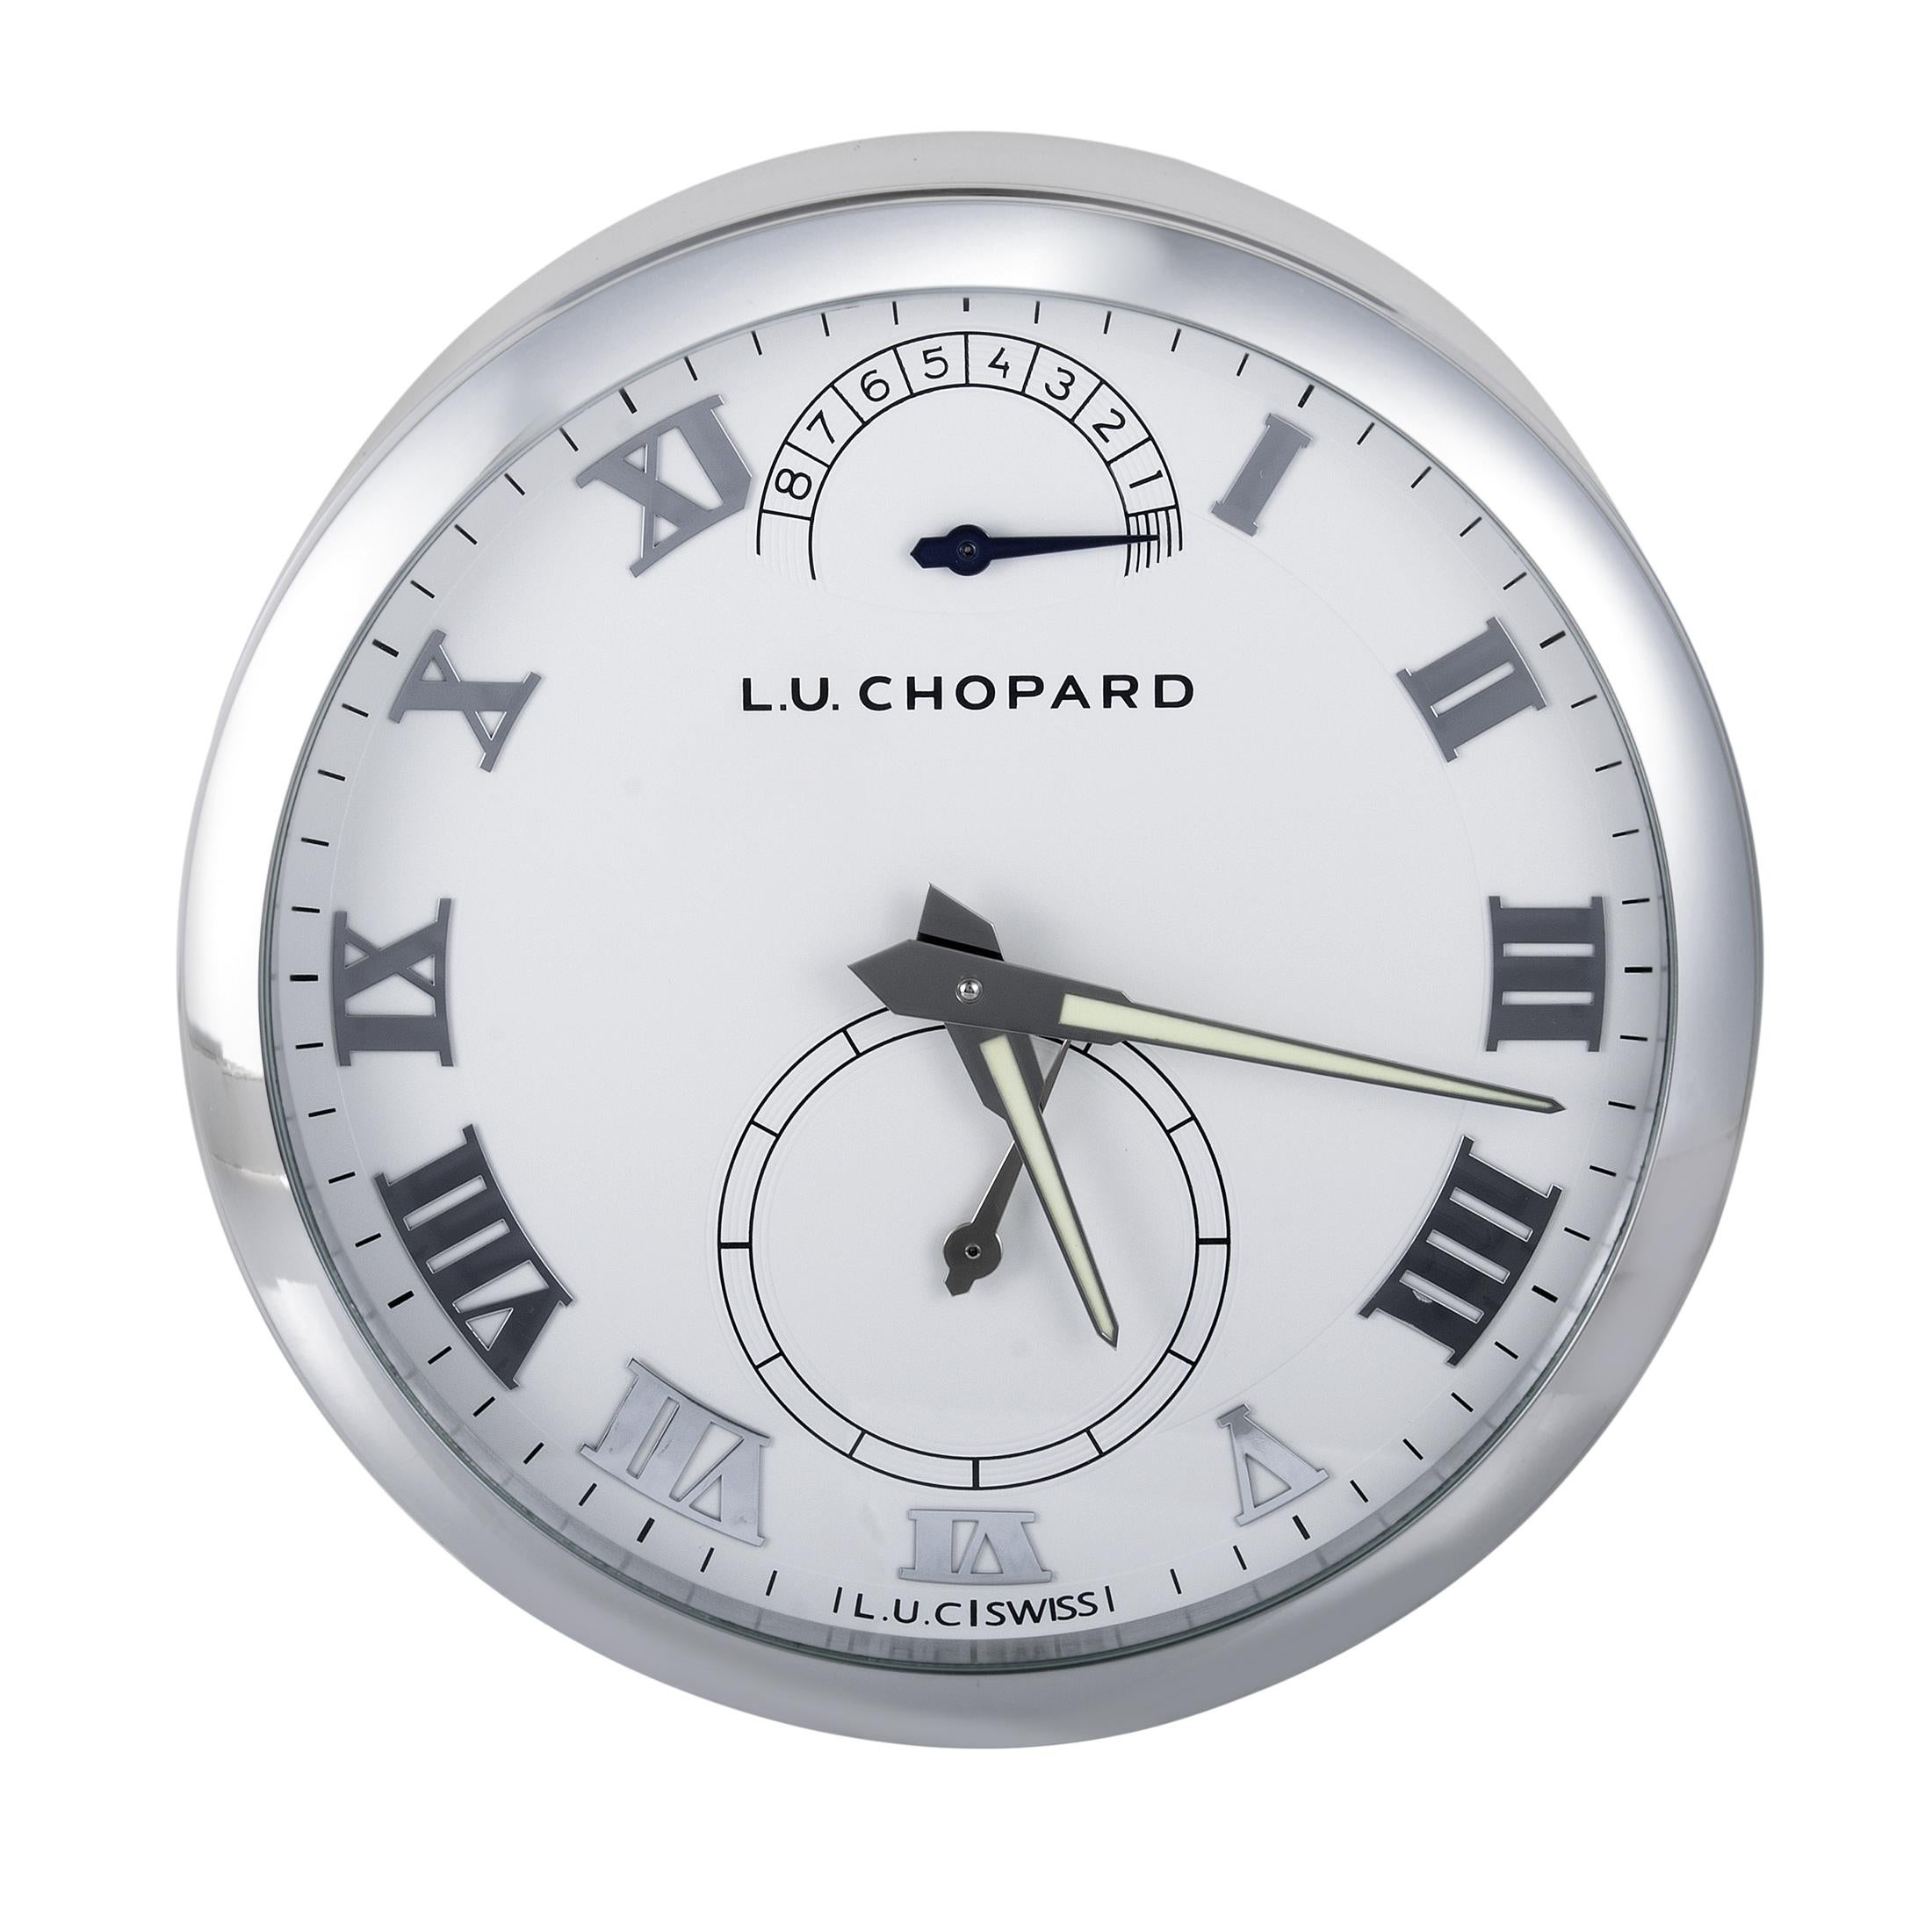 An irresistible view for any watchmaking connoisseur is provided at the transparent case back of this amazing piece from Chopard which is inspired by the brands L.U.C. collection and introduced as their first table clock with a hand-wound